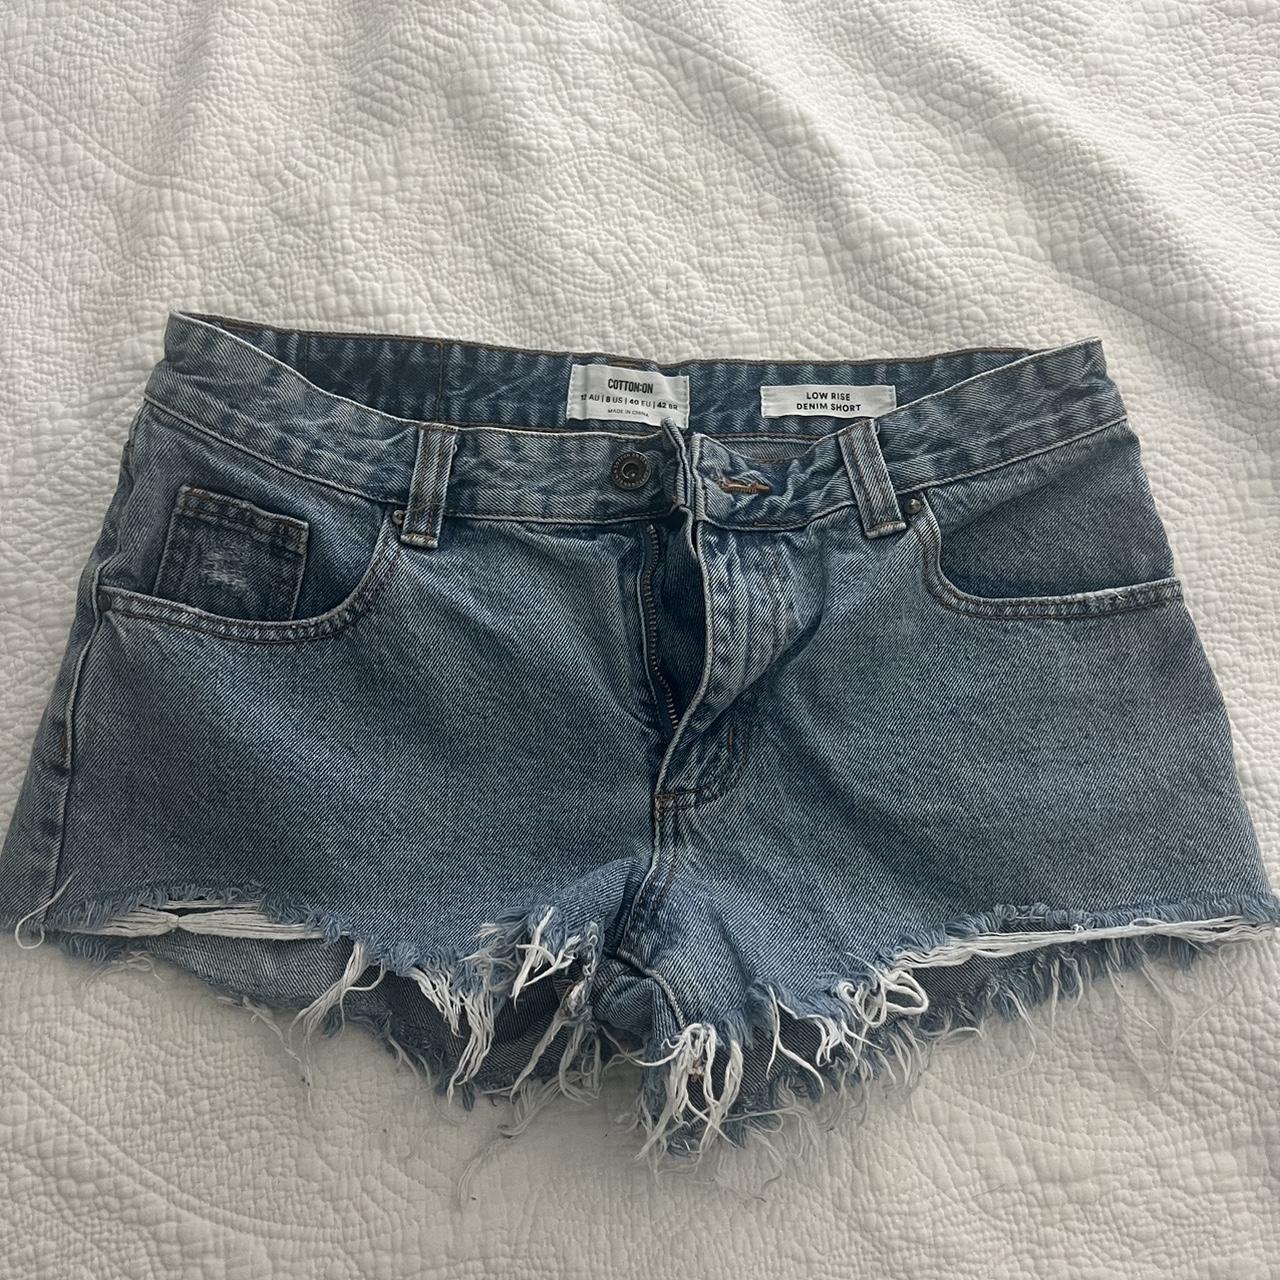 Blue Low Rise Jean shorts from Cotton On! Fairly... - Depop